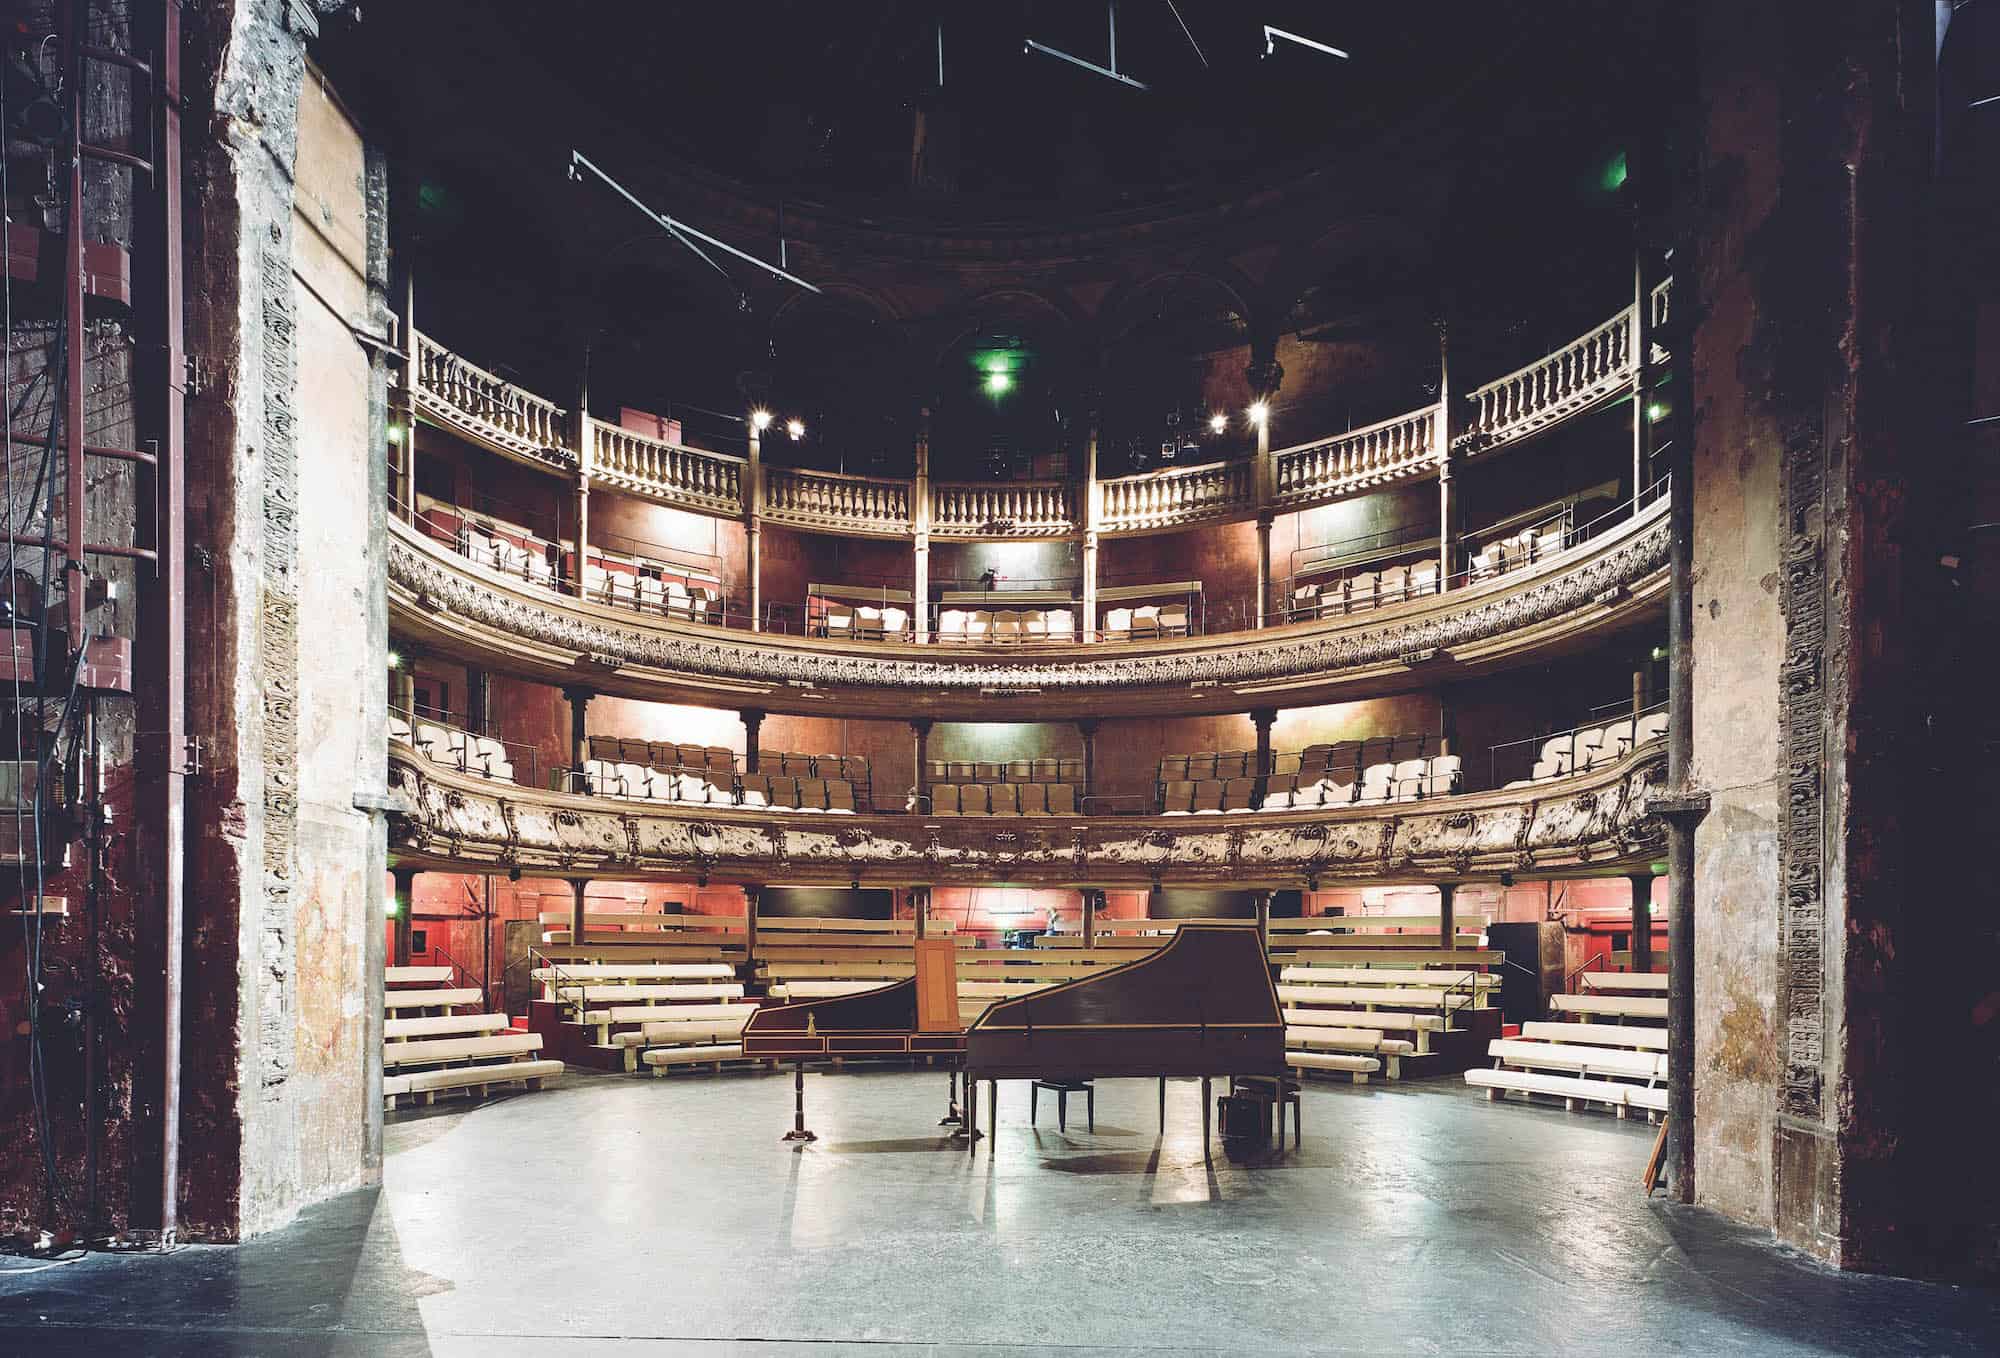 One of the best theatres in Paris is the Bouffes de Nord, with its wooden seating area, and it's close to La Chapelle neighborhood.